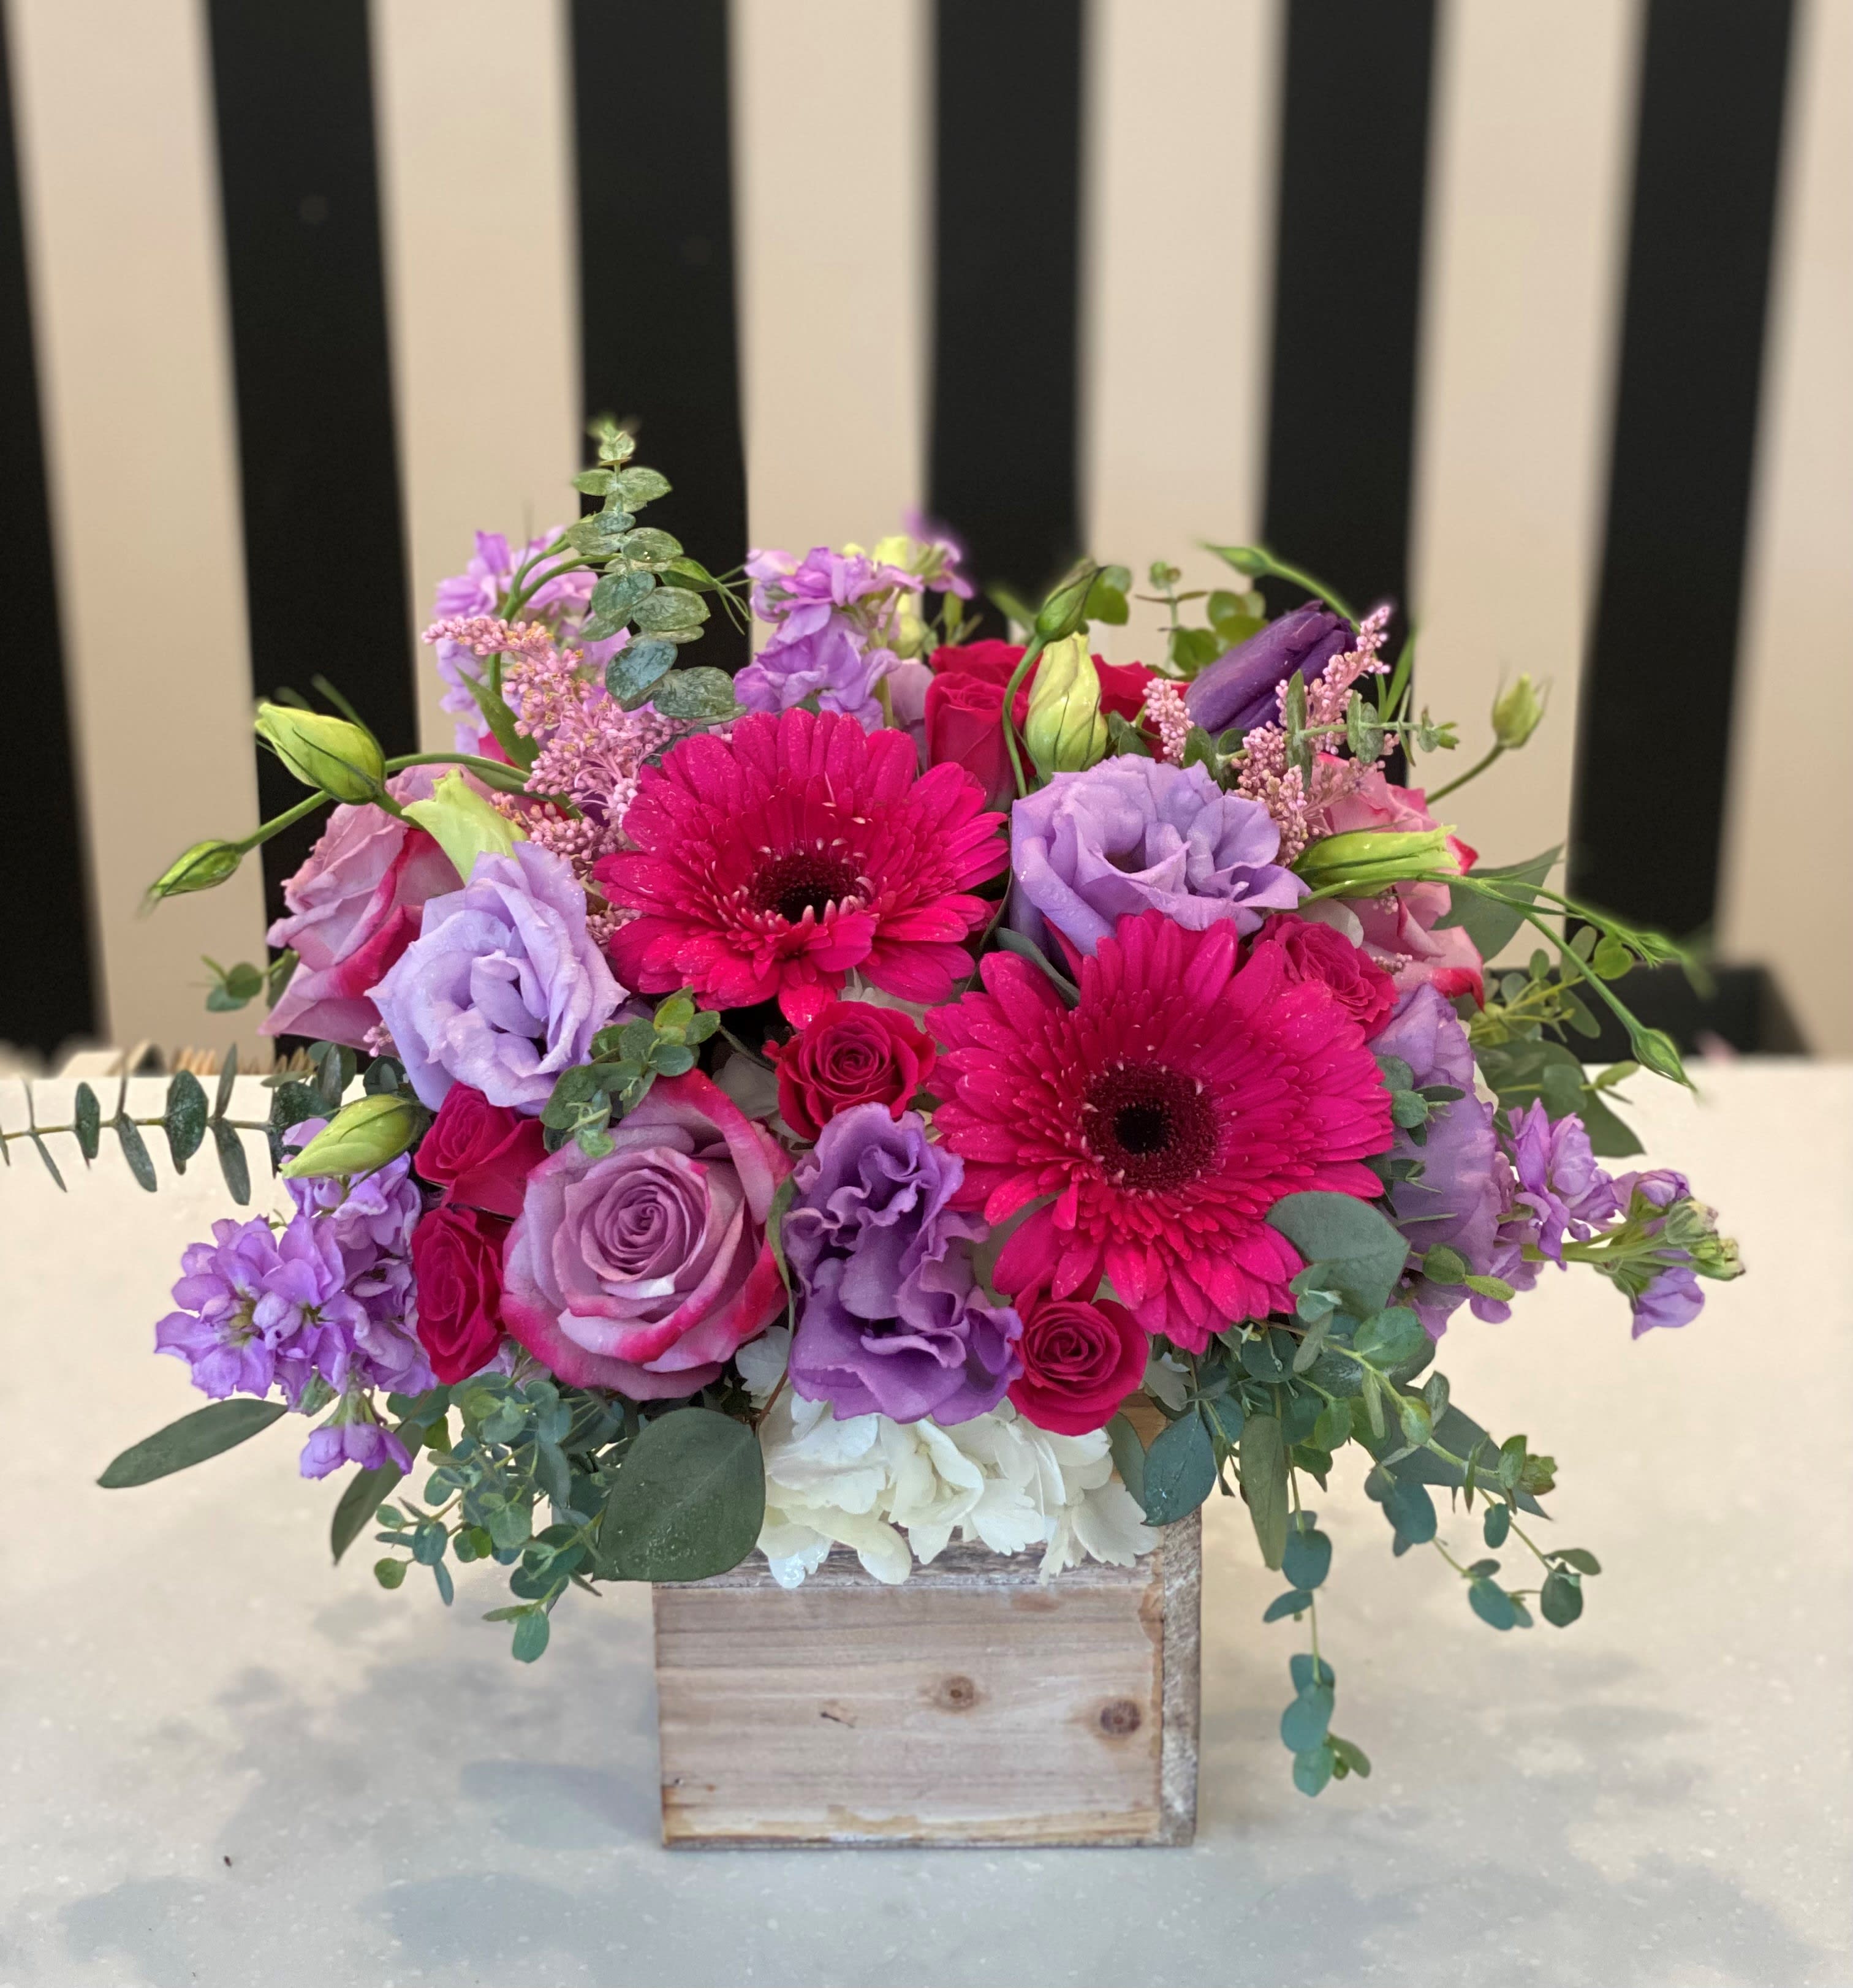 Sweet Unique - Pink and lavender flower assortment in a wood box.